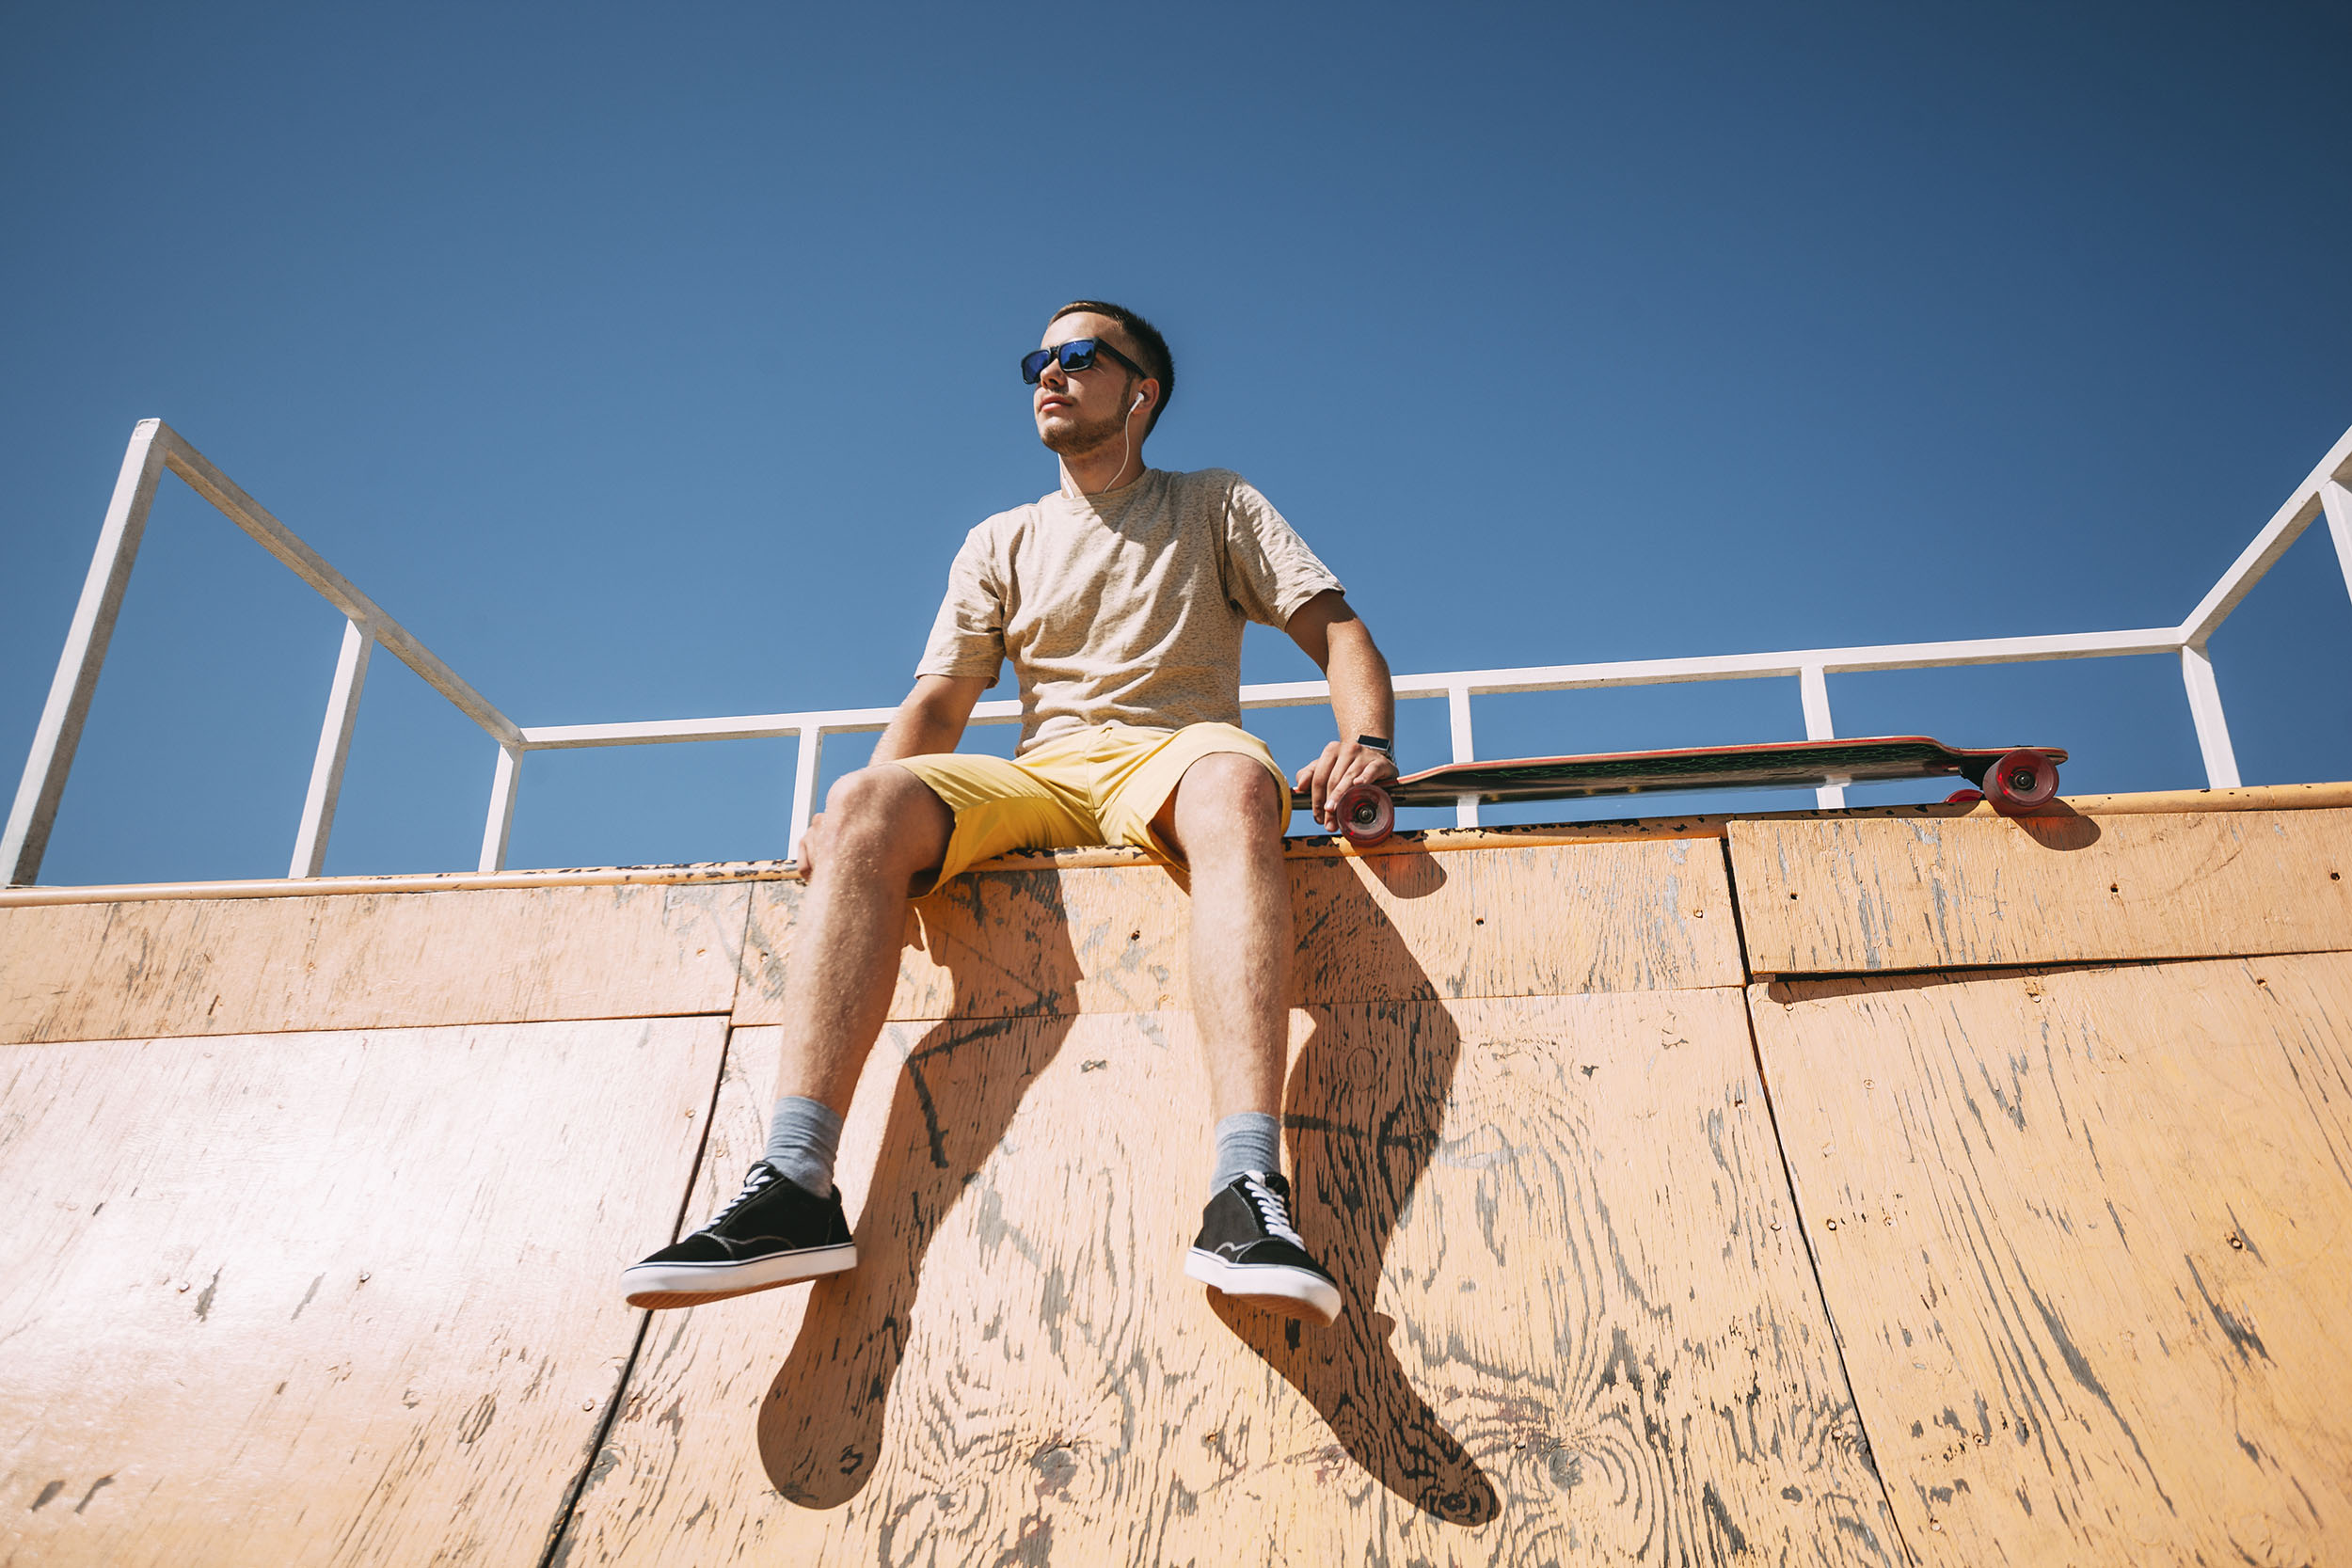 The best skateboard clothing brands for a casual, carefree vibe